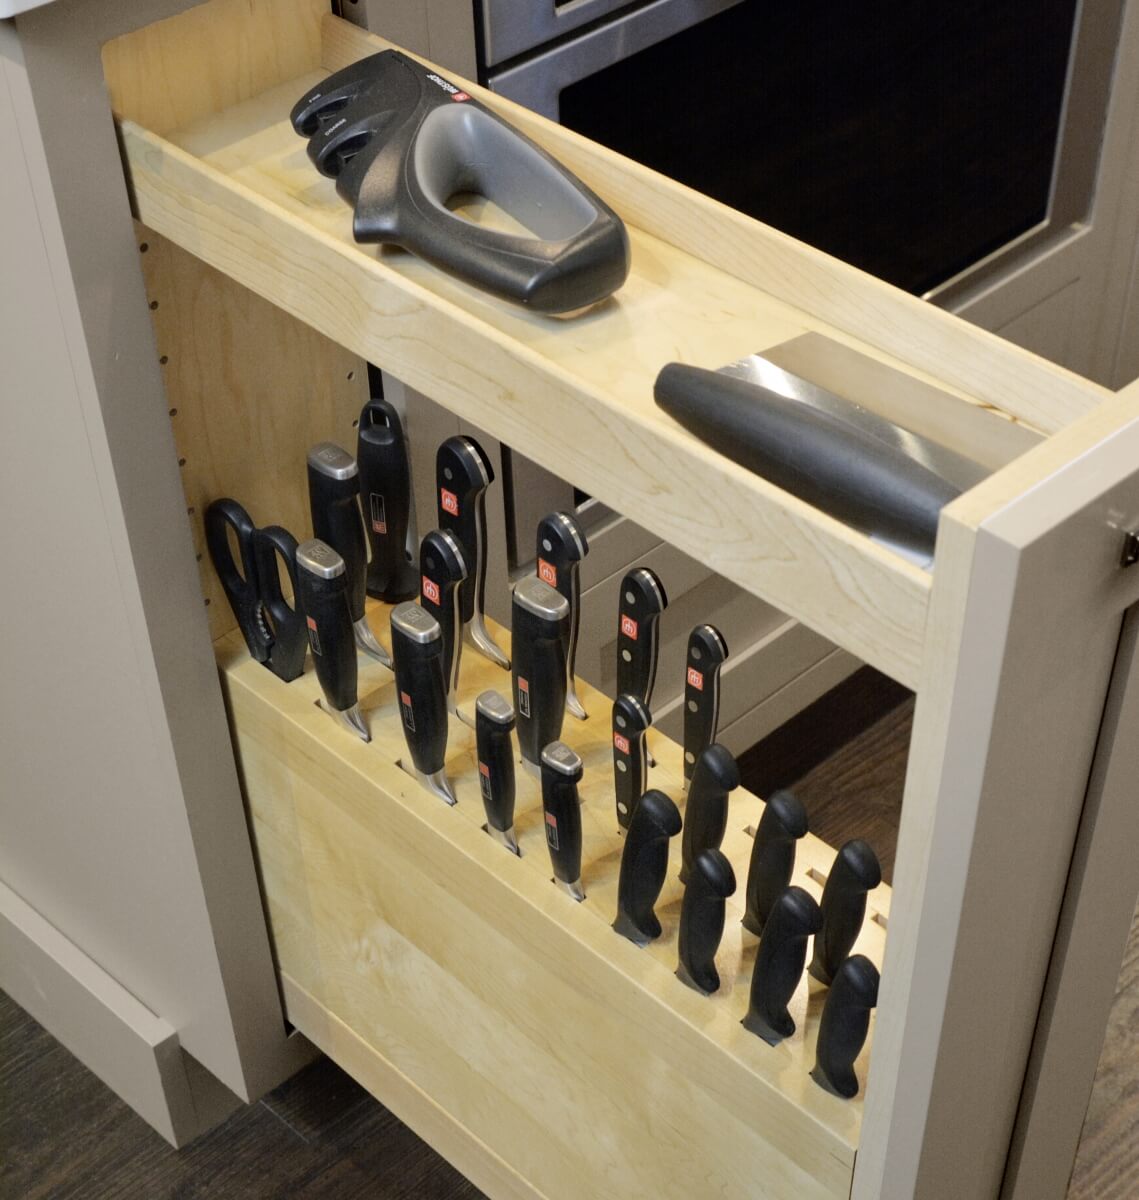 A Knife Block Pull-Out Cabinet using the top tier for misc. food preparation tools.